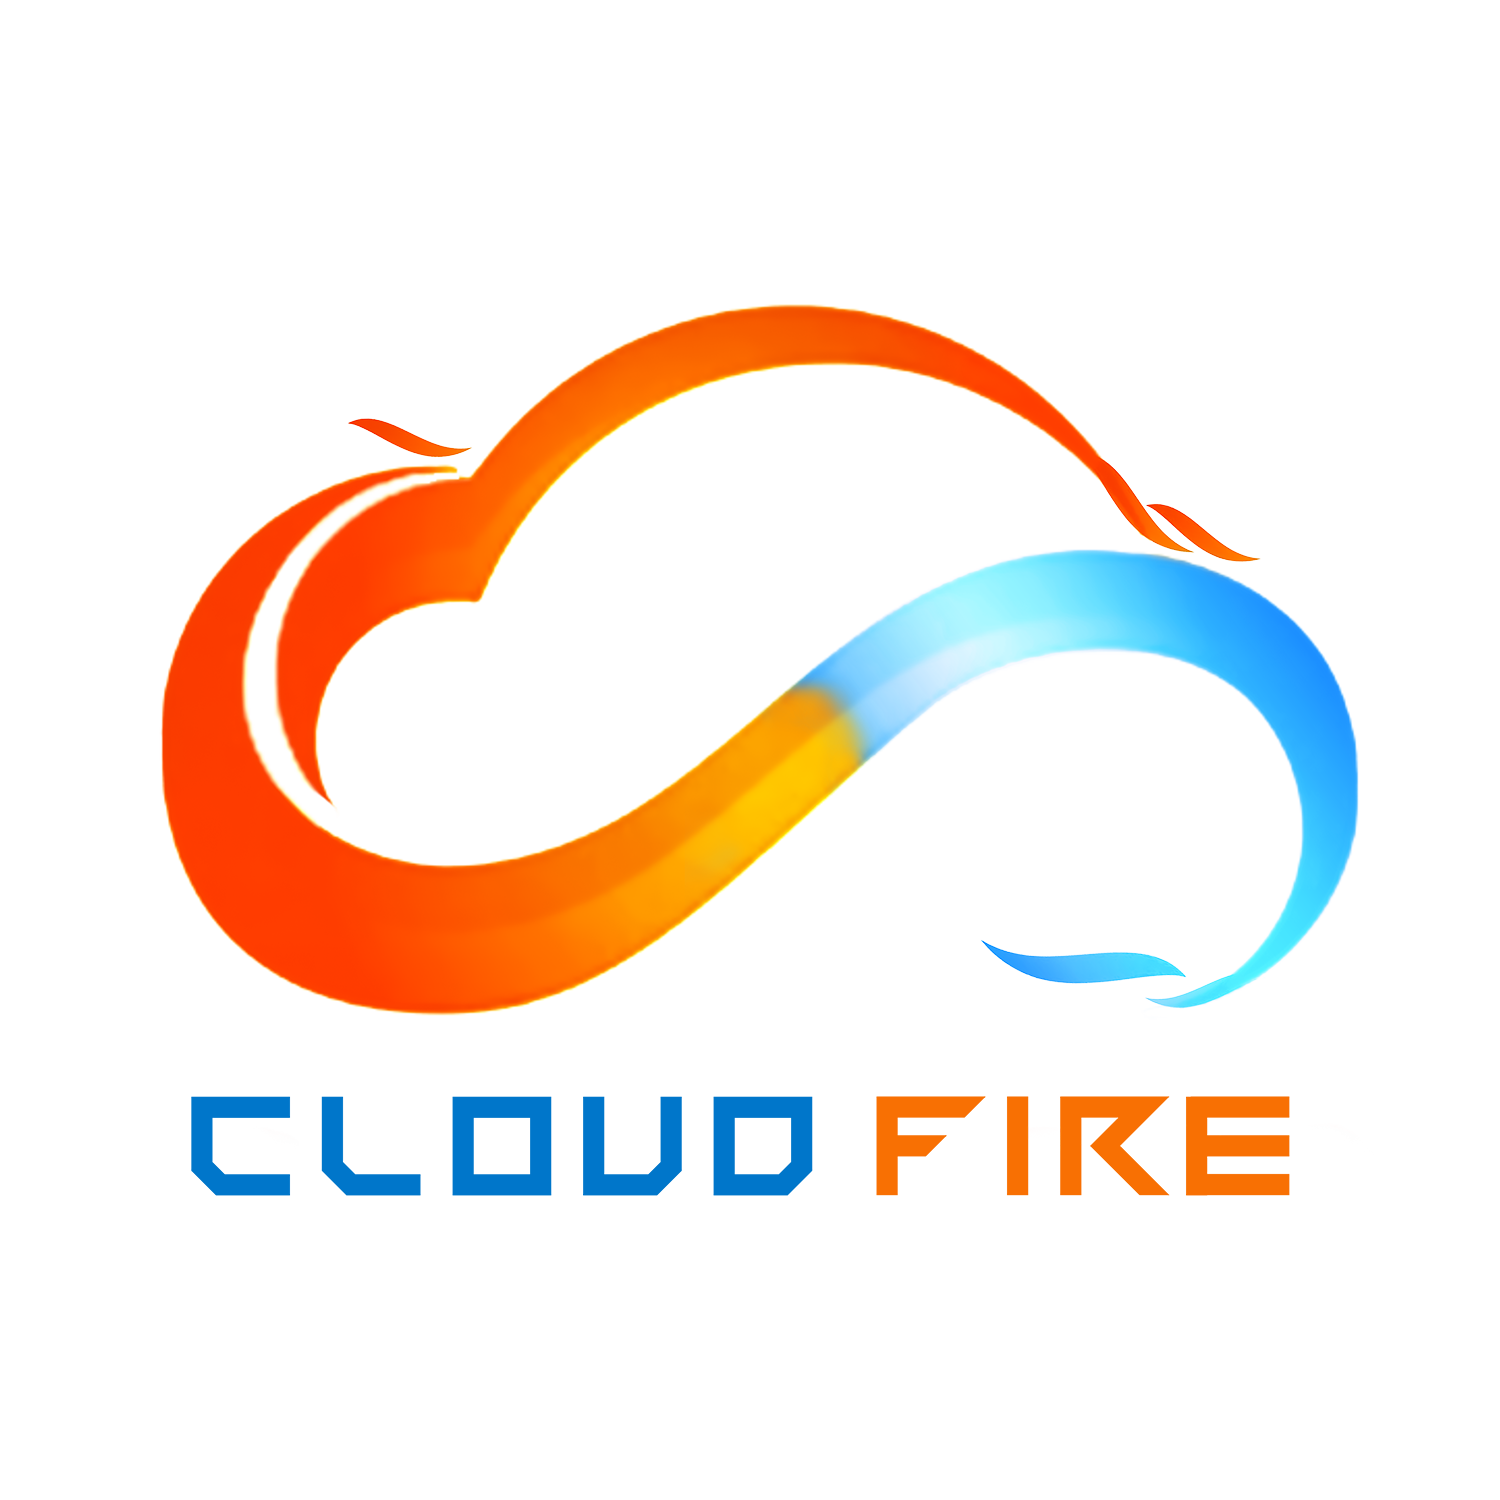 Cloud Fire Technologies and Staffing